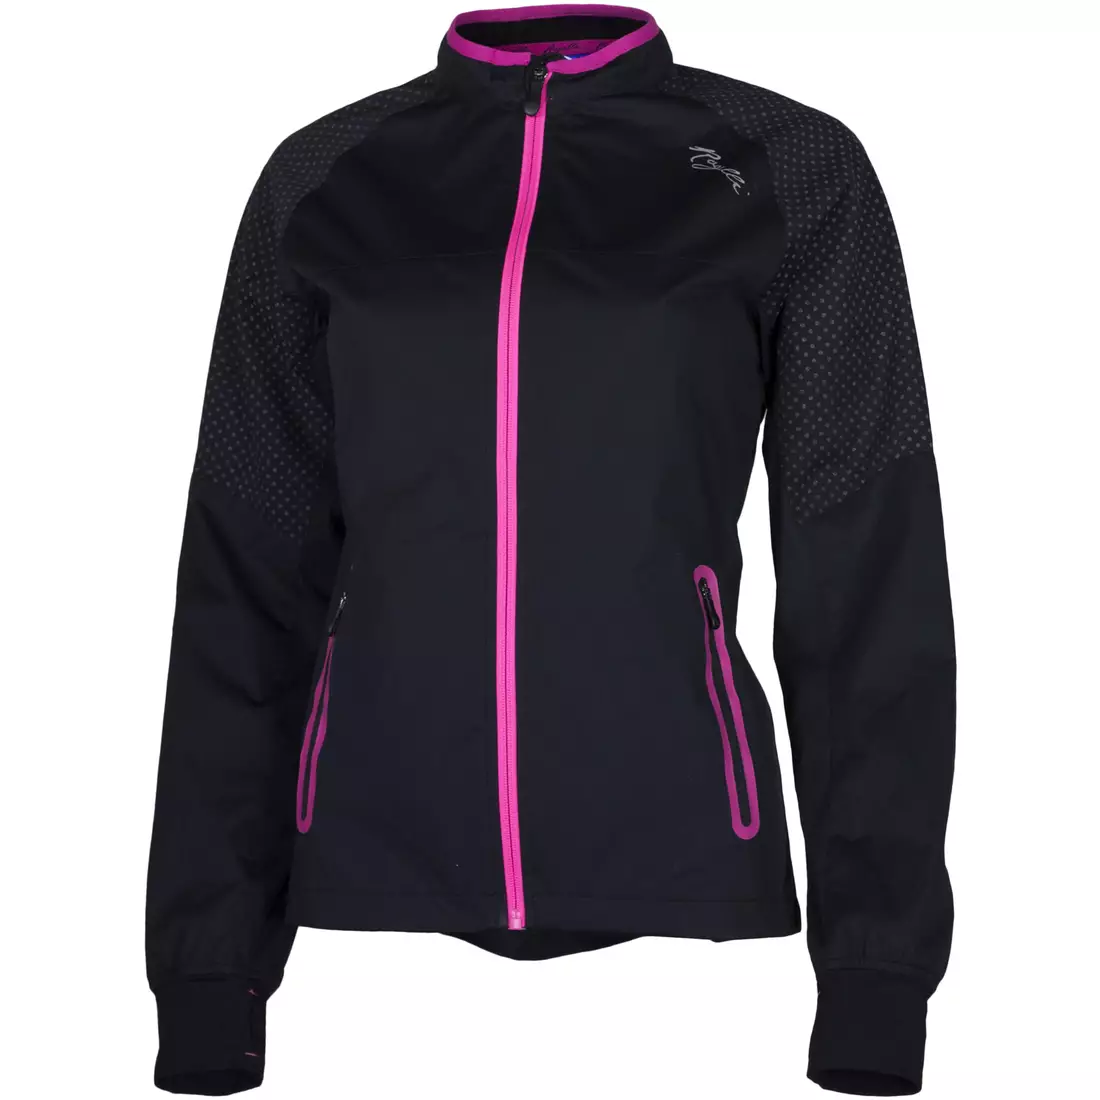 ROGELLI STERNE 801.801 women's running jacket, black and pink